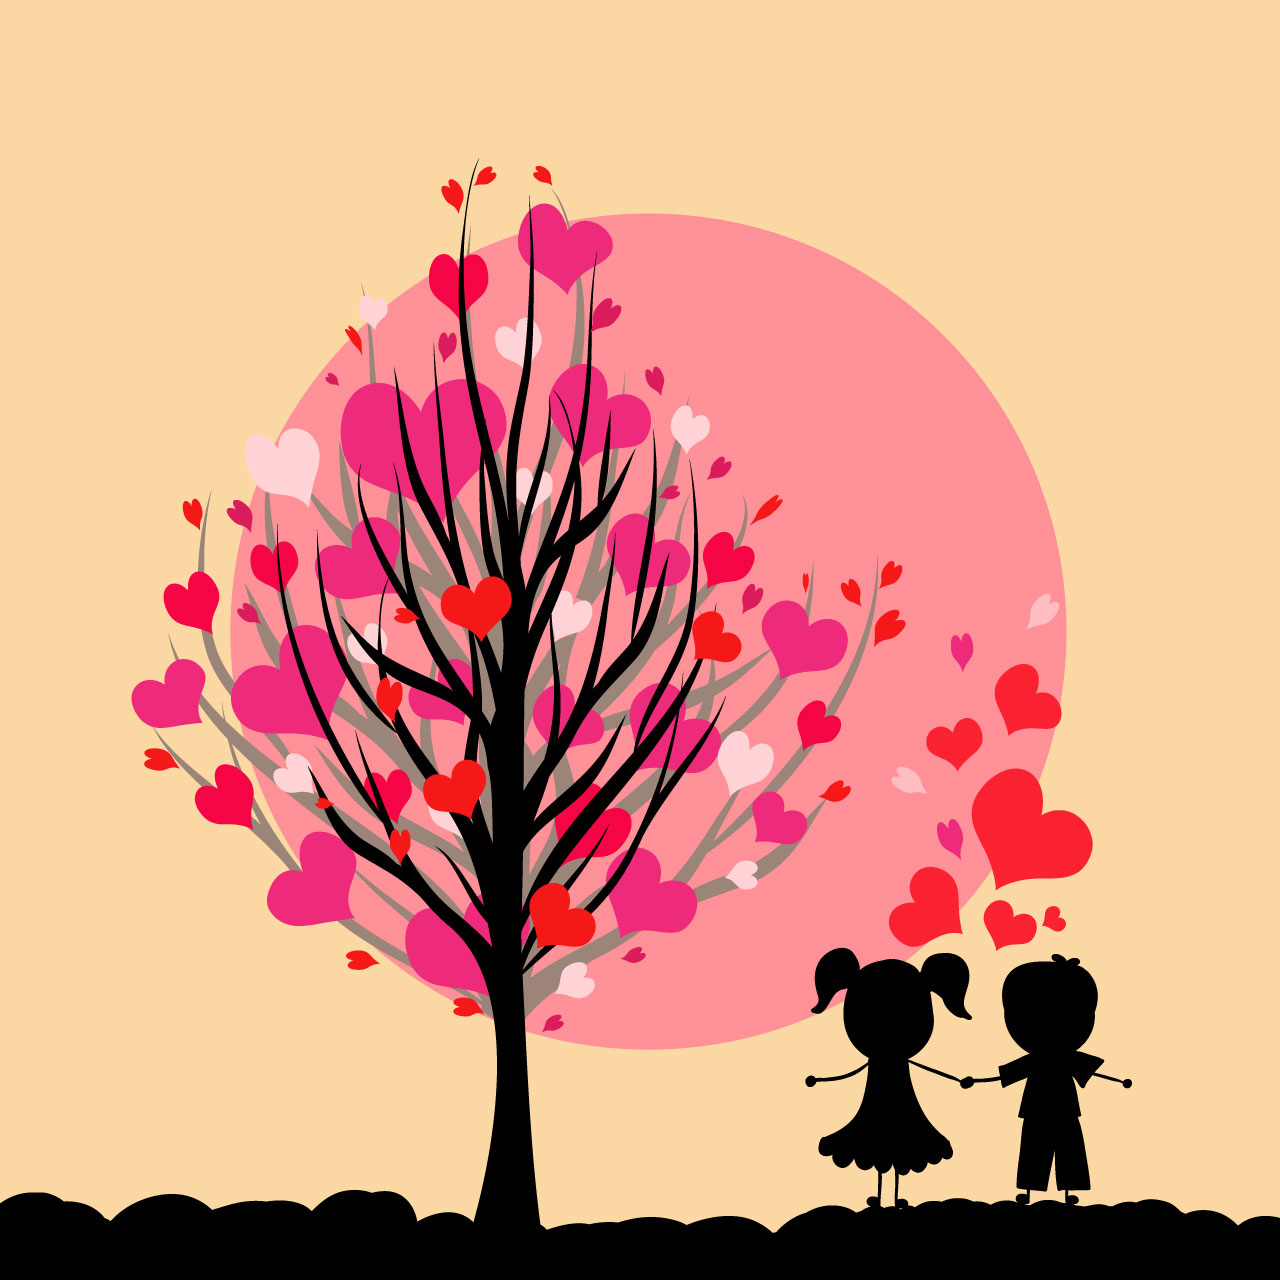 Love heart clipart tree with hearts its branches kids love hand drawing sketch